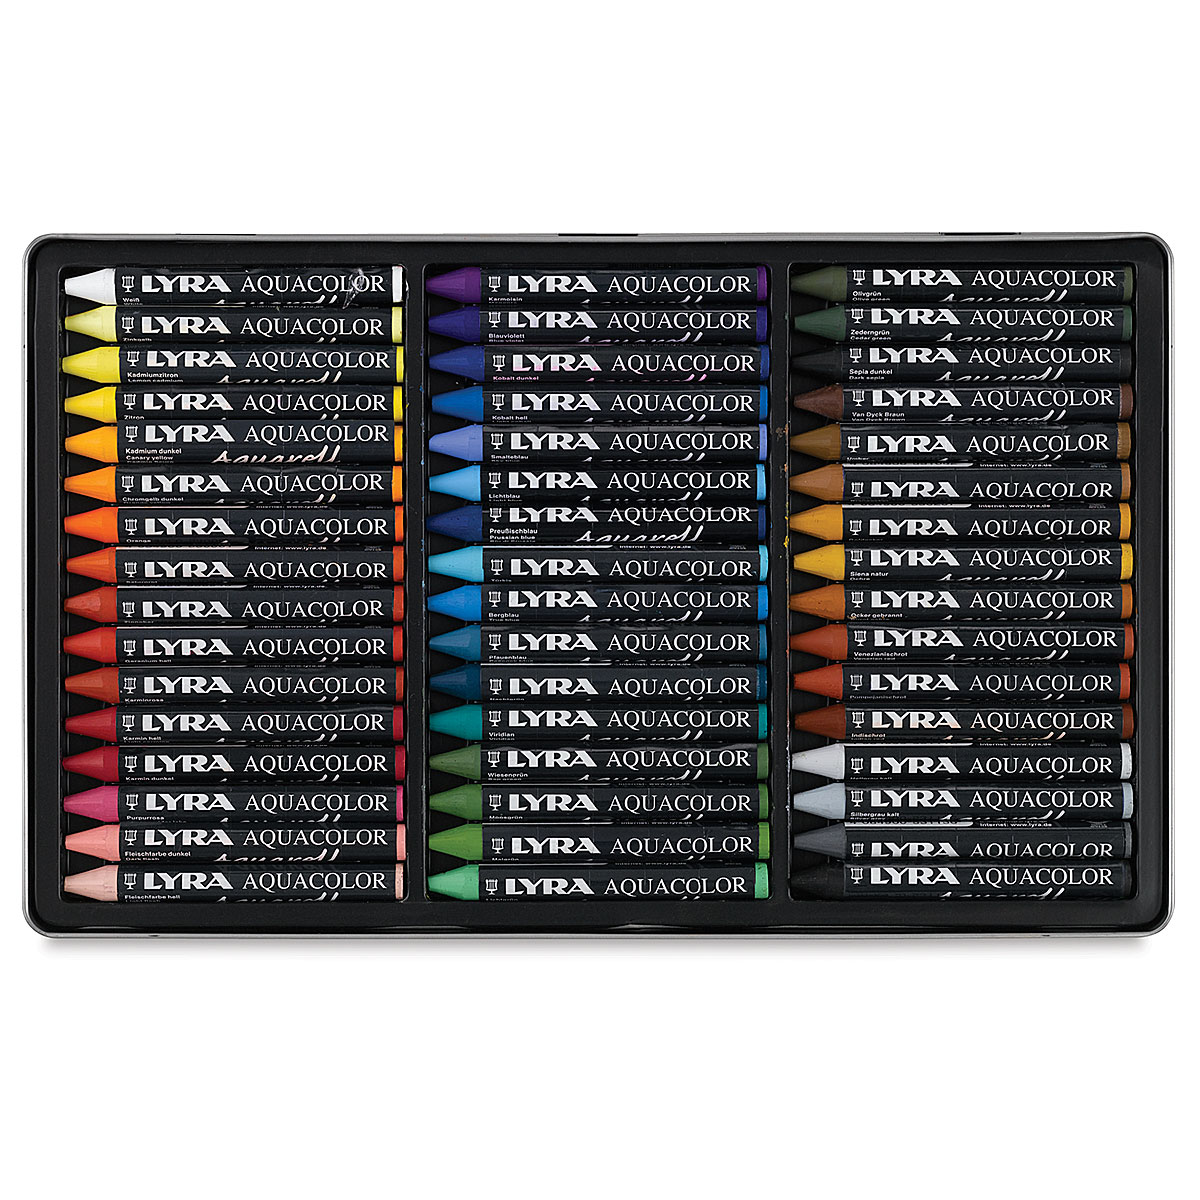 Lyra Aquacolor Crayon Set - Assorted Colors, Water-Soluble, Set of 48